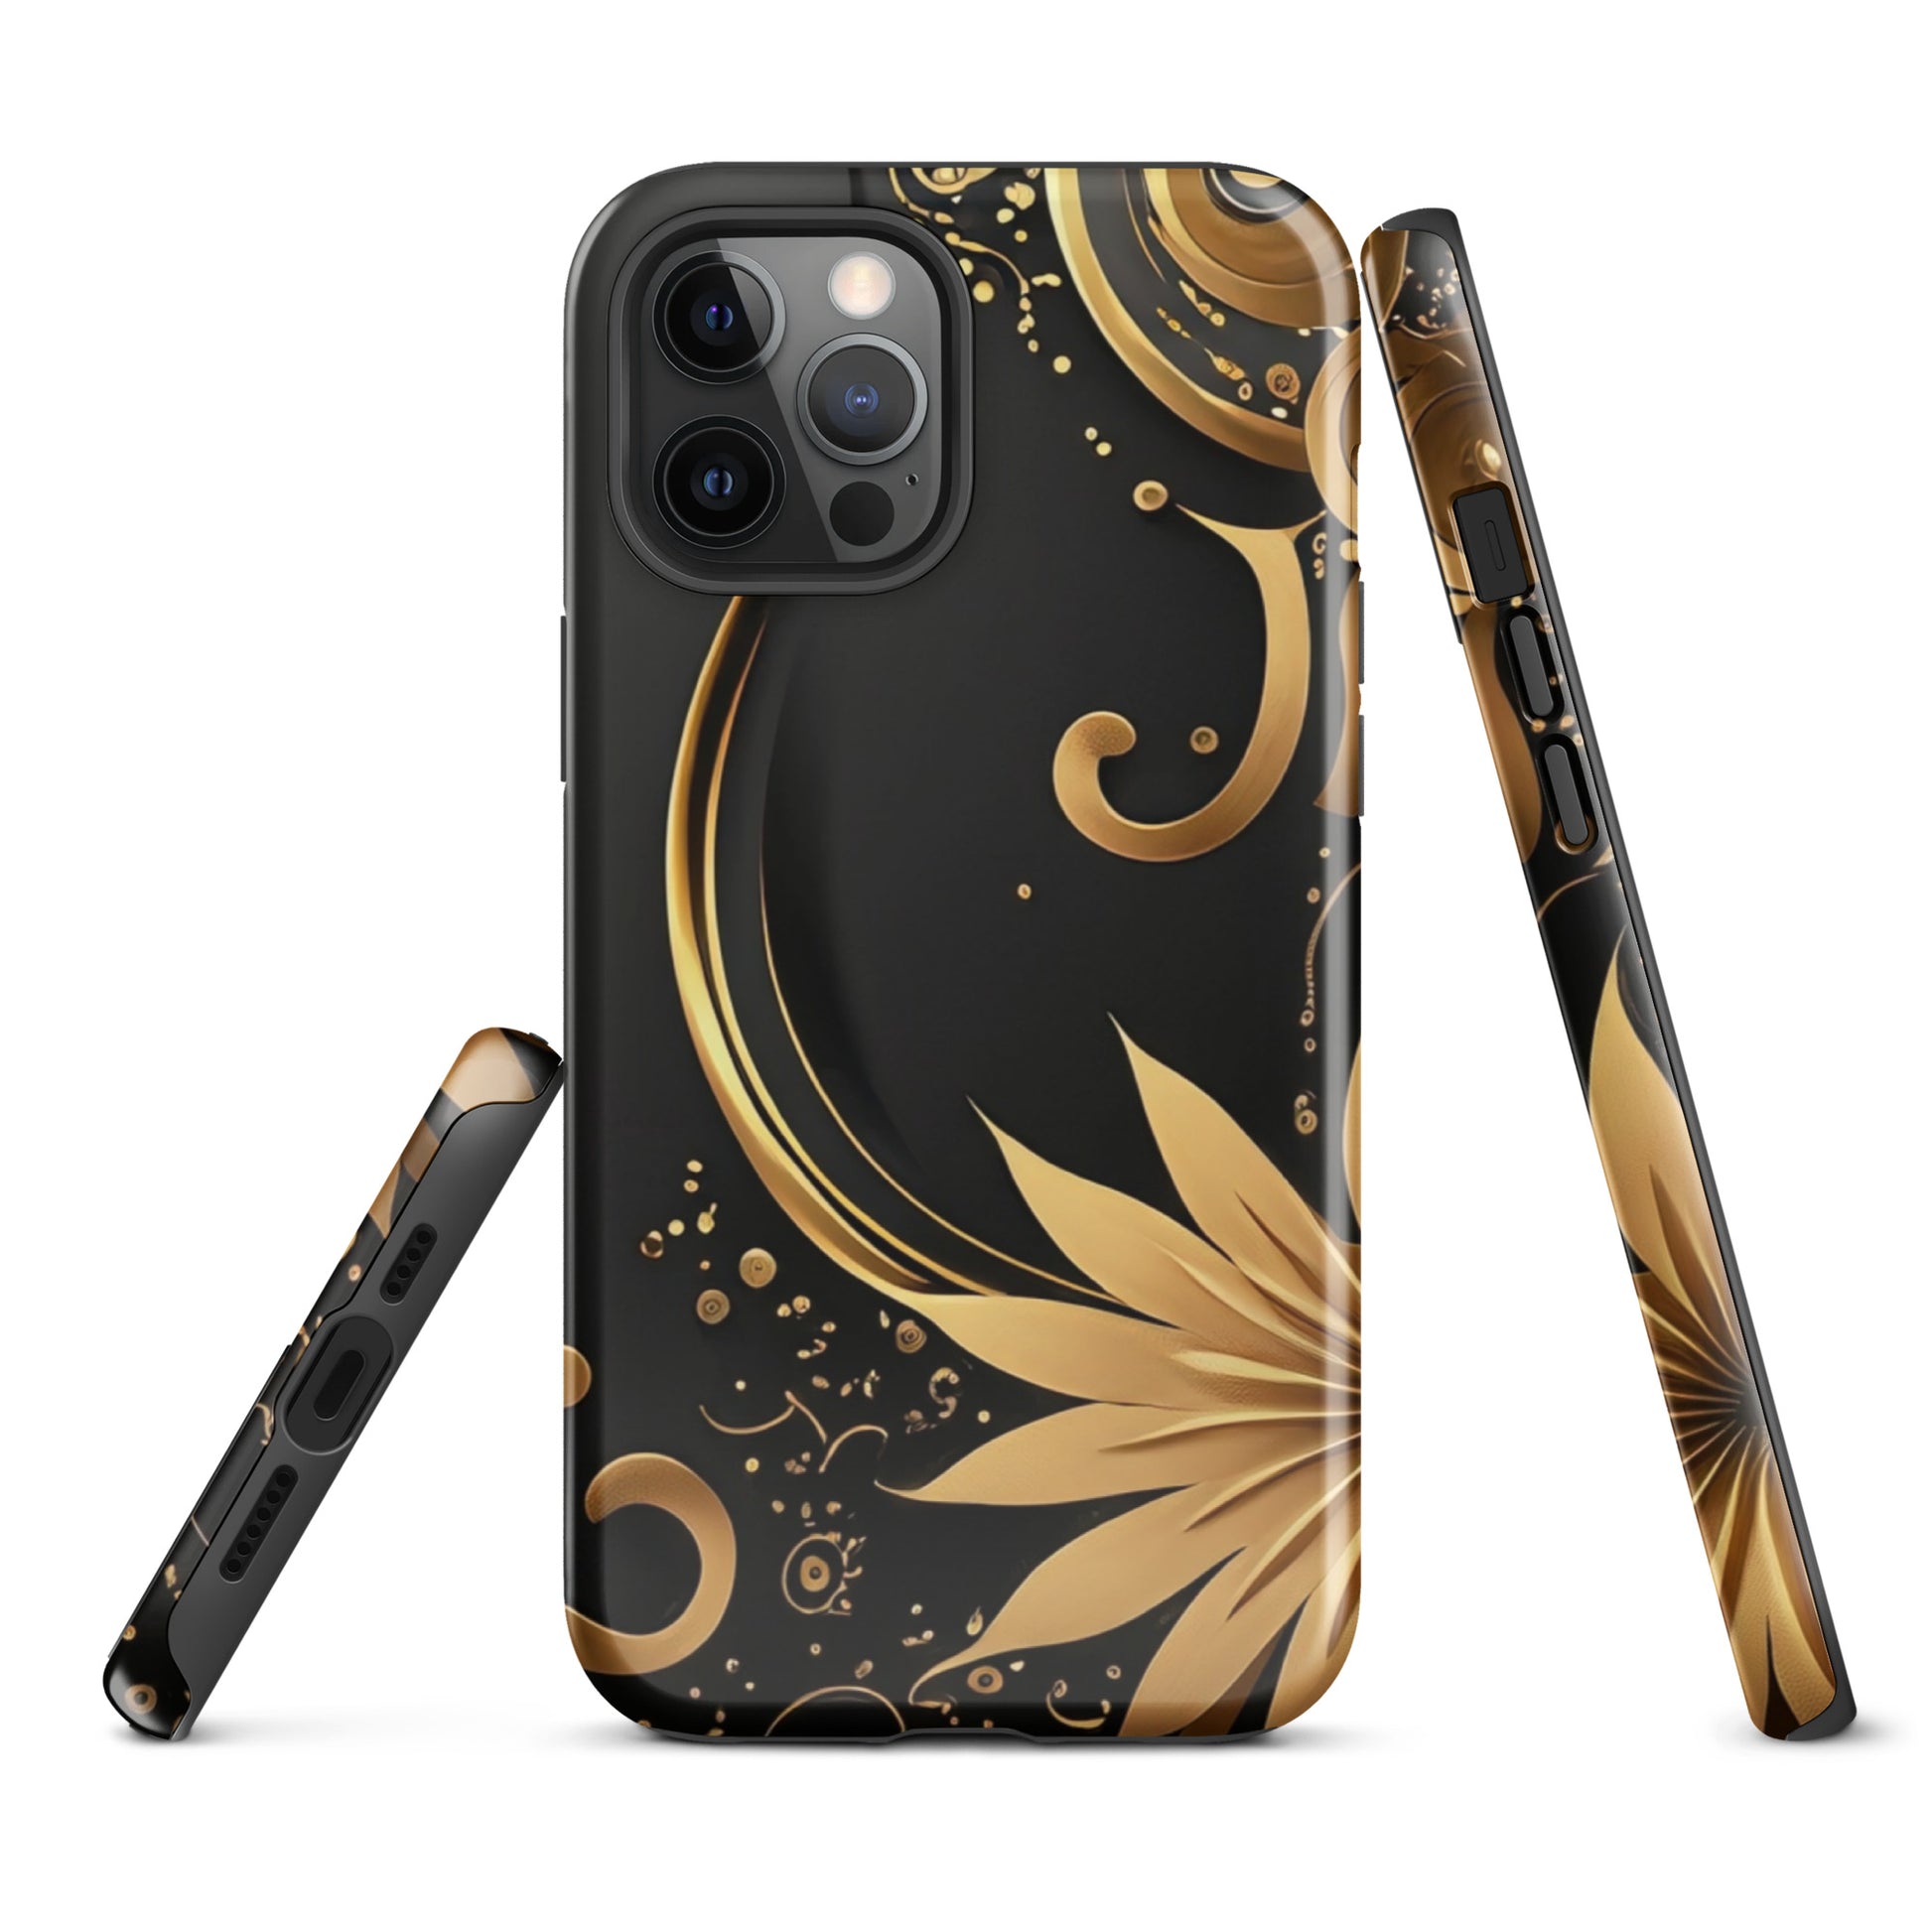 A Golden Flower Case for the iPhone 12 Pro Max